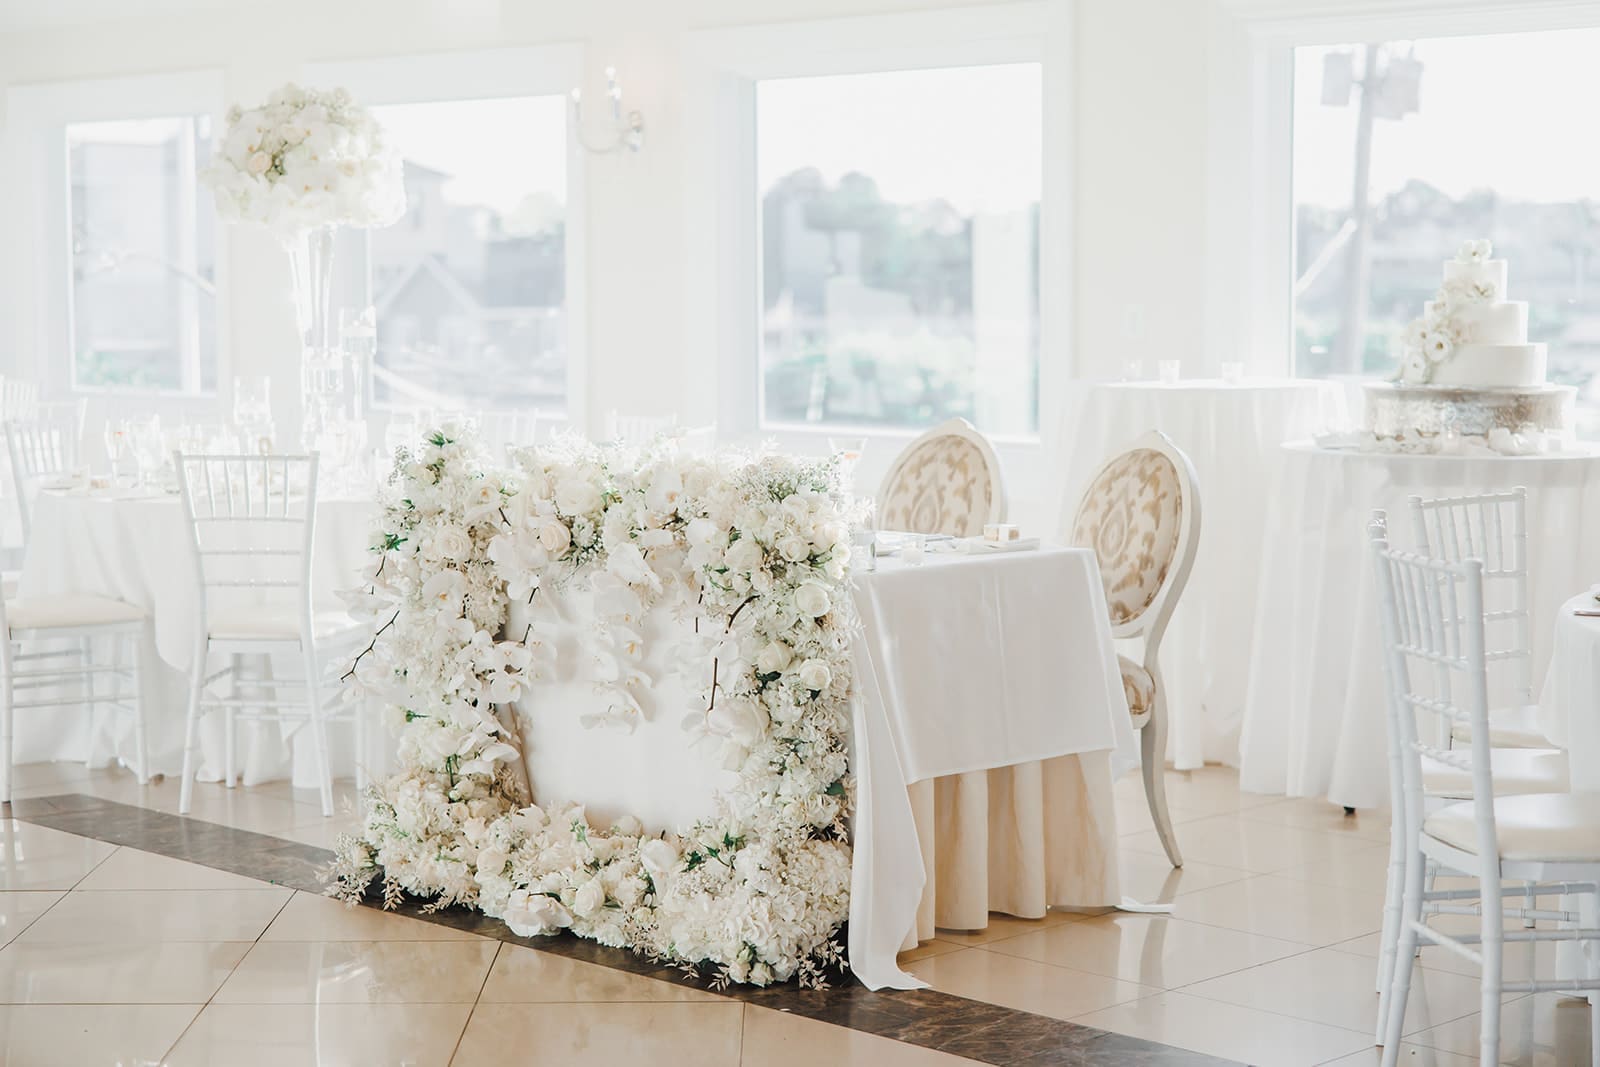 A wedding reception with white flowers and white tables.